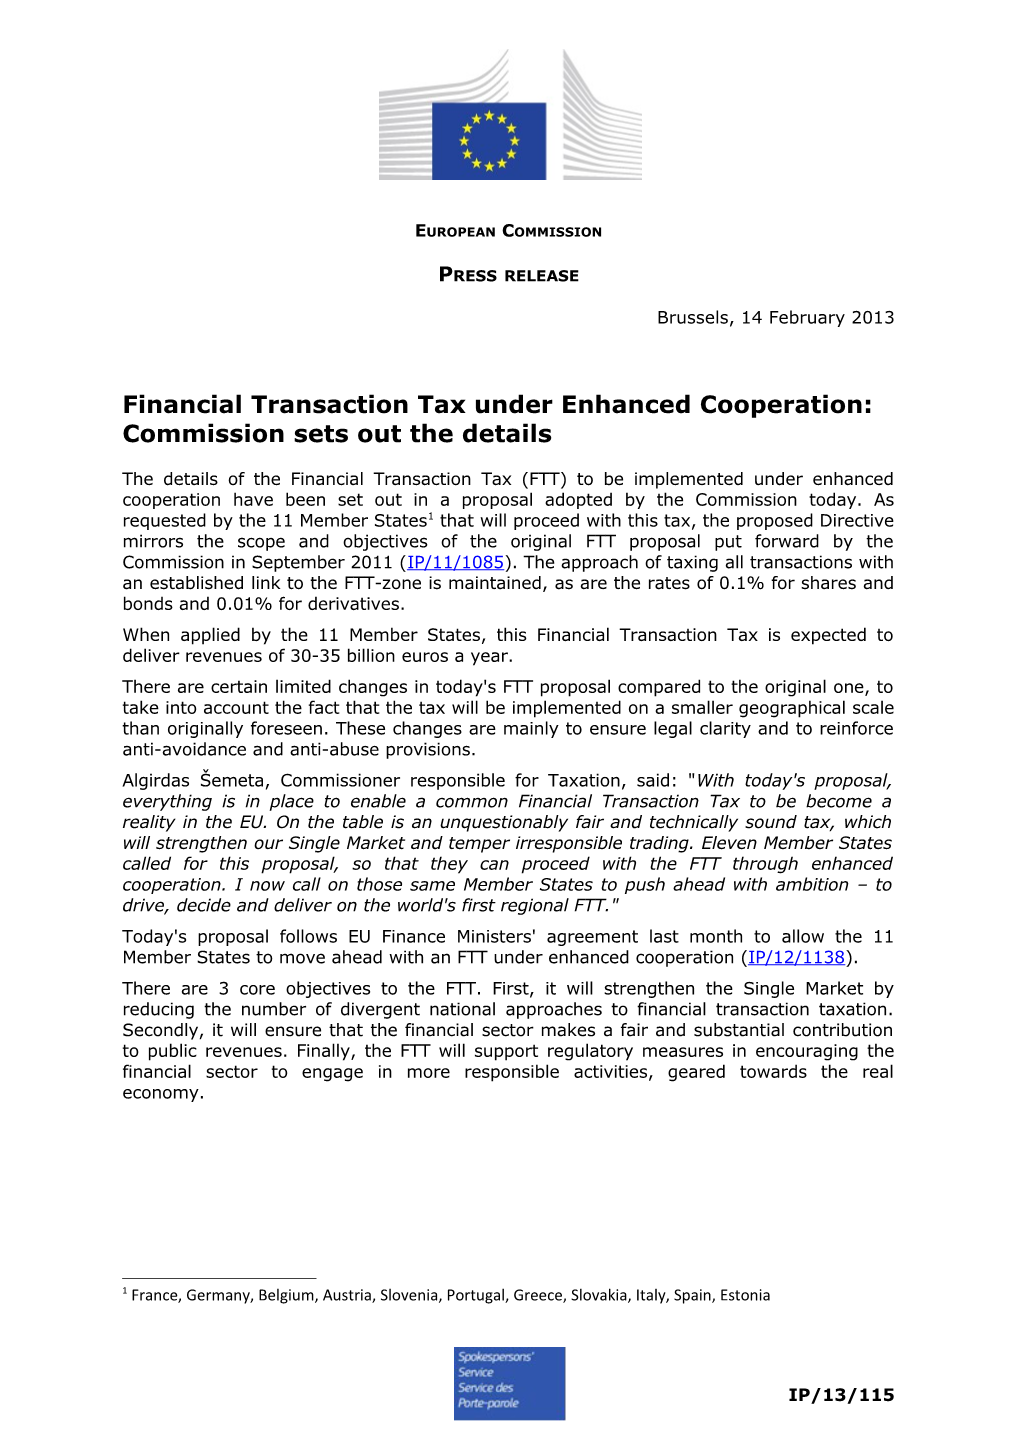 Financial Transaction Tax Under Enhanced Cooperation: Commission Sets out the Details